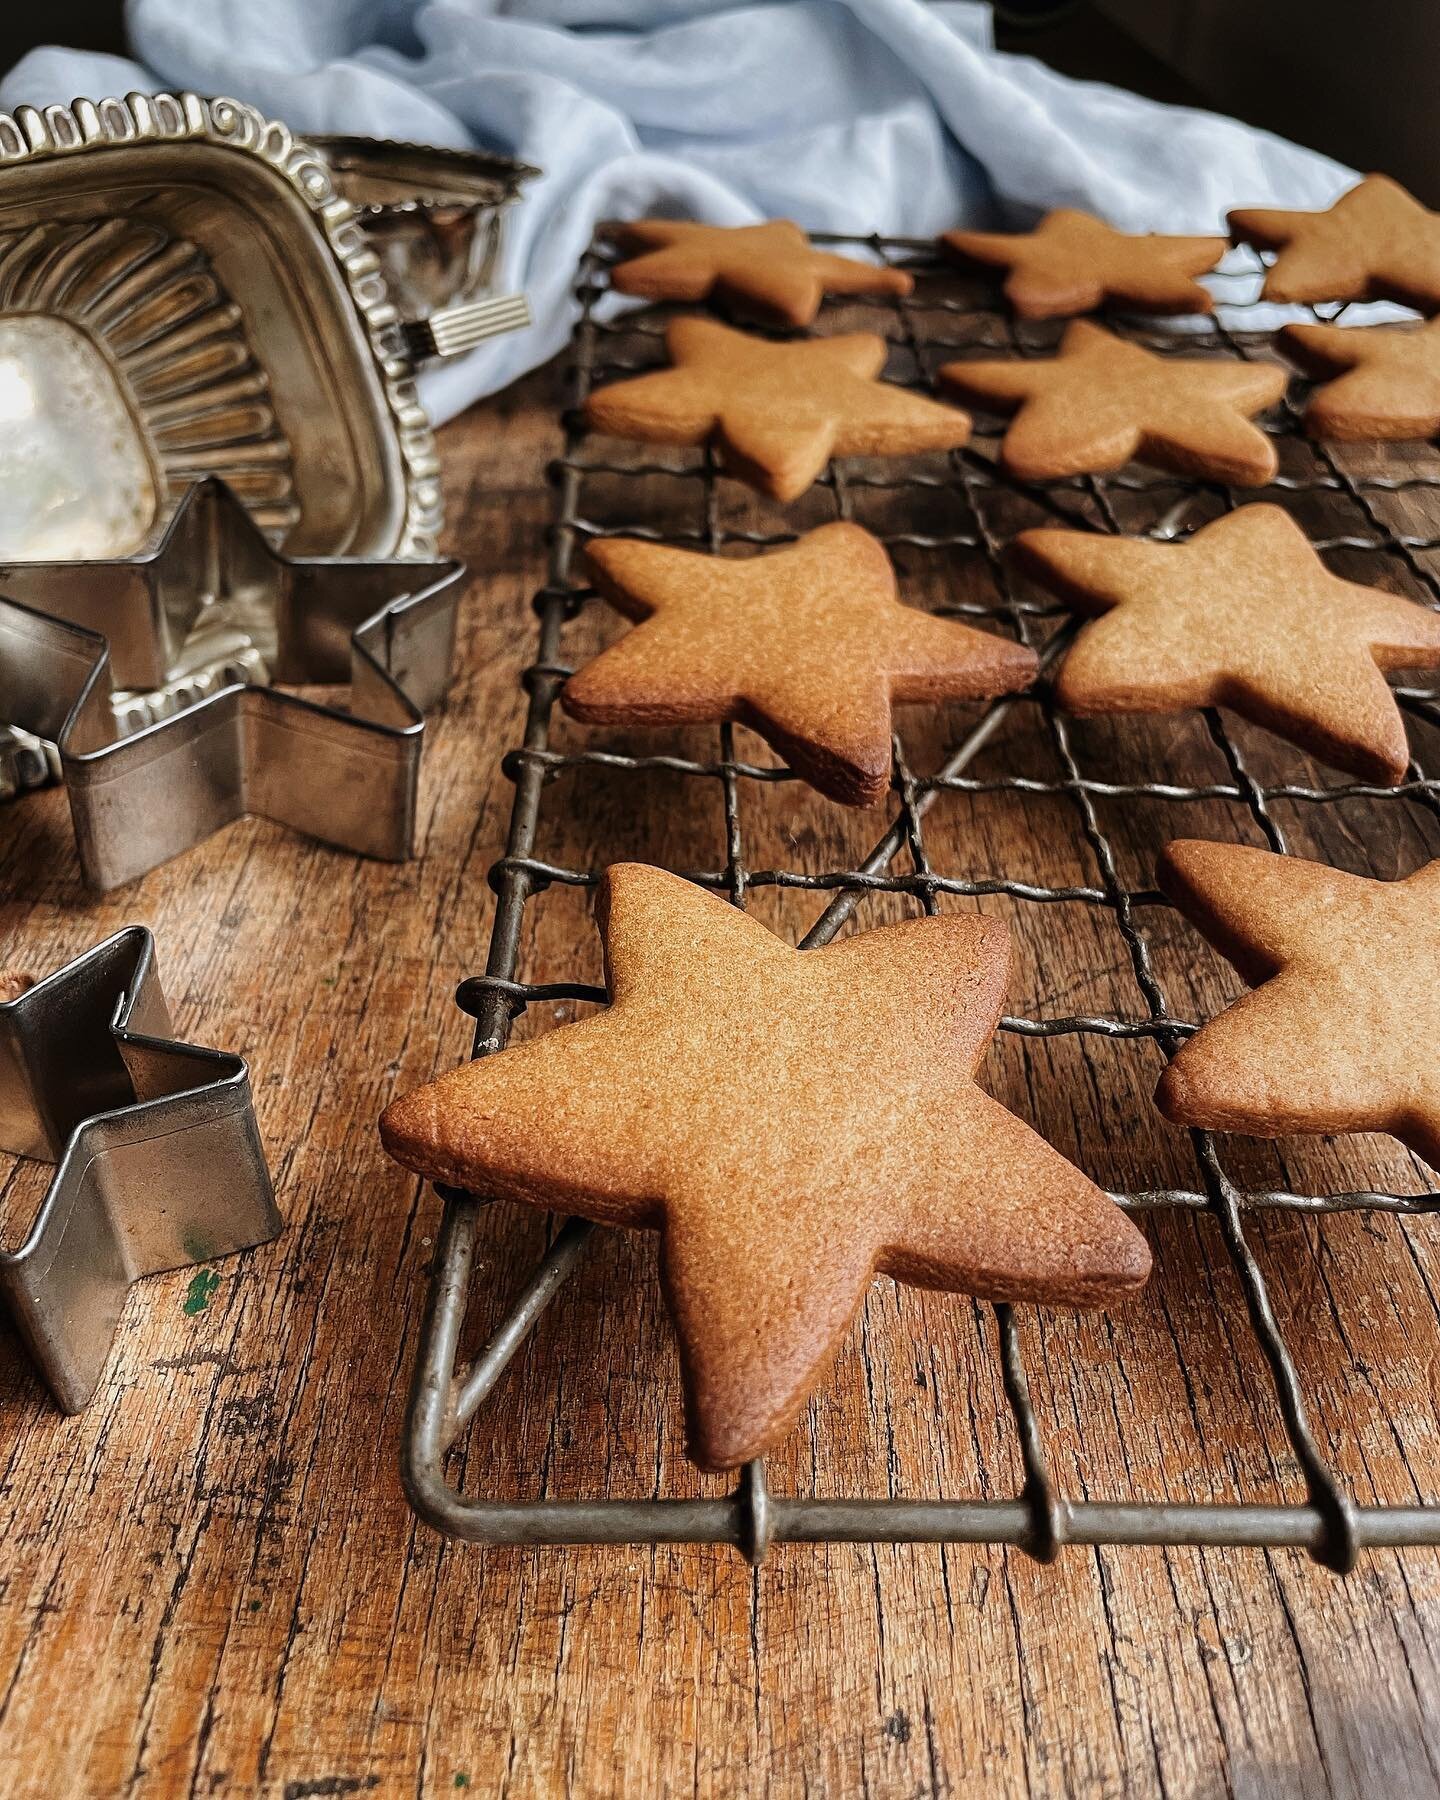 Running a bit behind schedule this week, so just select biscuits out and about tomorrow (probably a bit later than usual), and no macarons sorry. #christmasgingerbread #gingerbread #biscuits #theflourmillerswifebiscuits